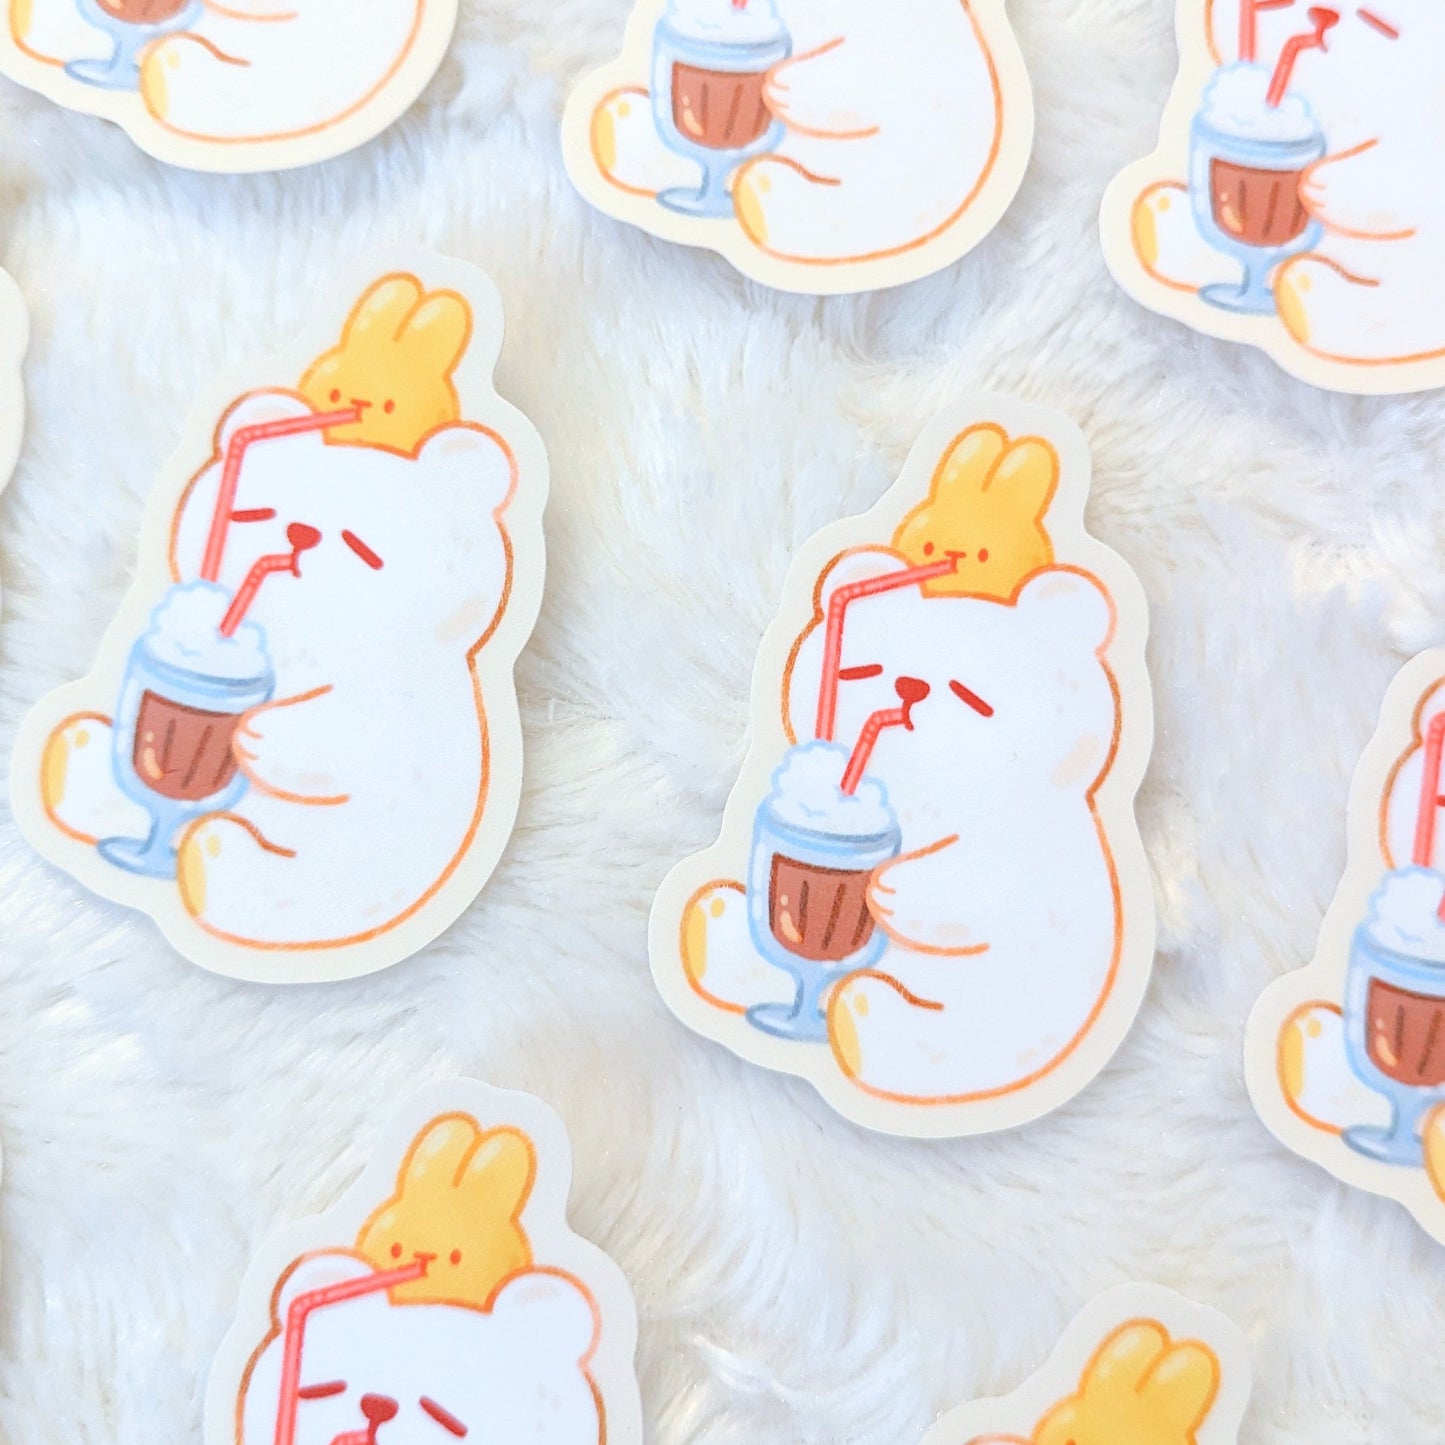 Sunny and Cloud Waterproof Stickers